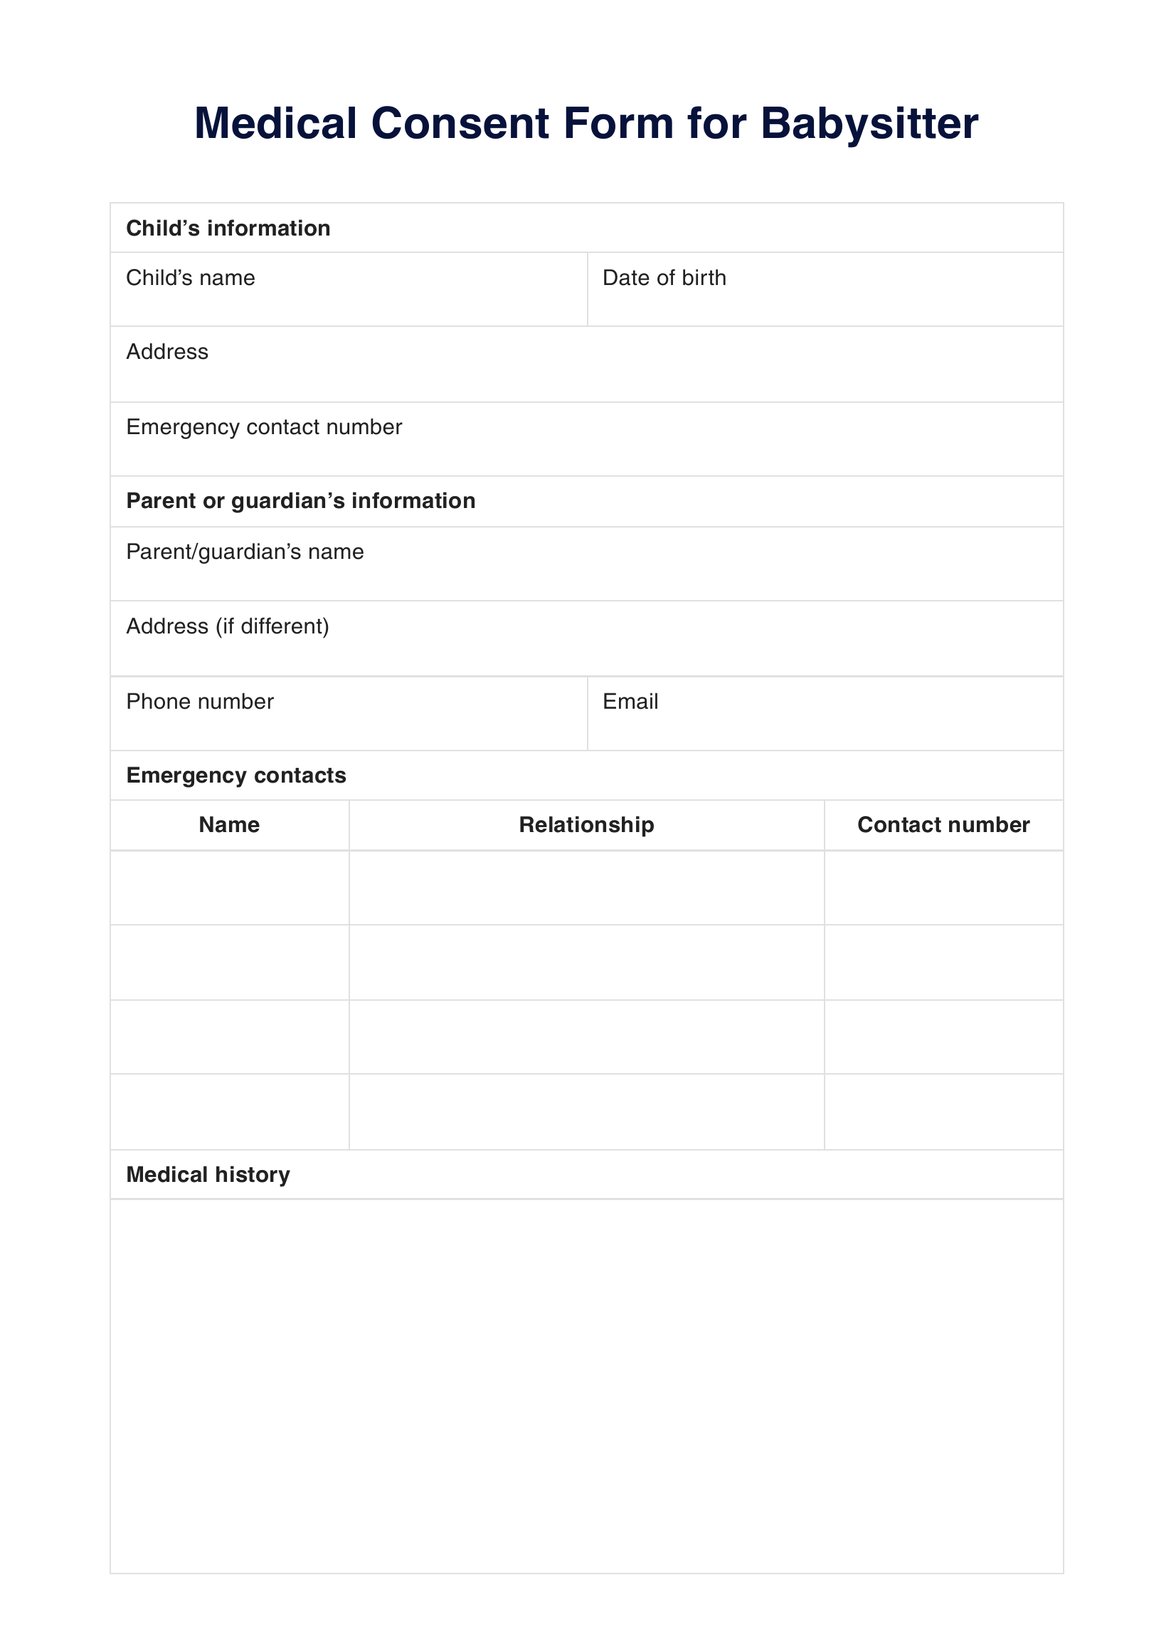 Medical Consent Form PDF Example